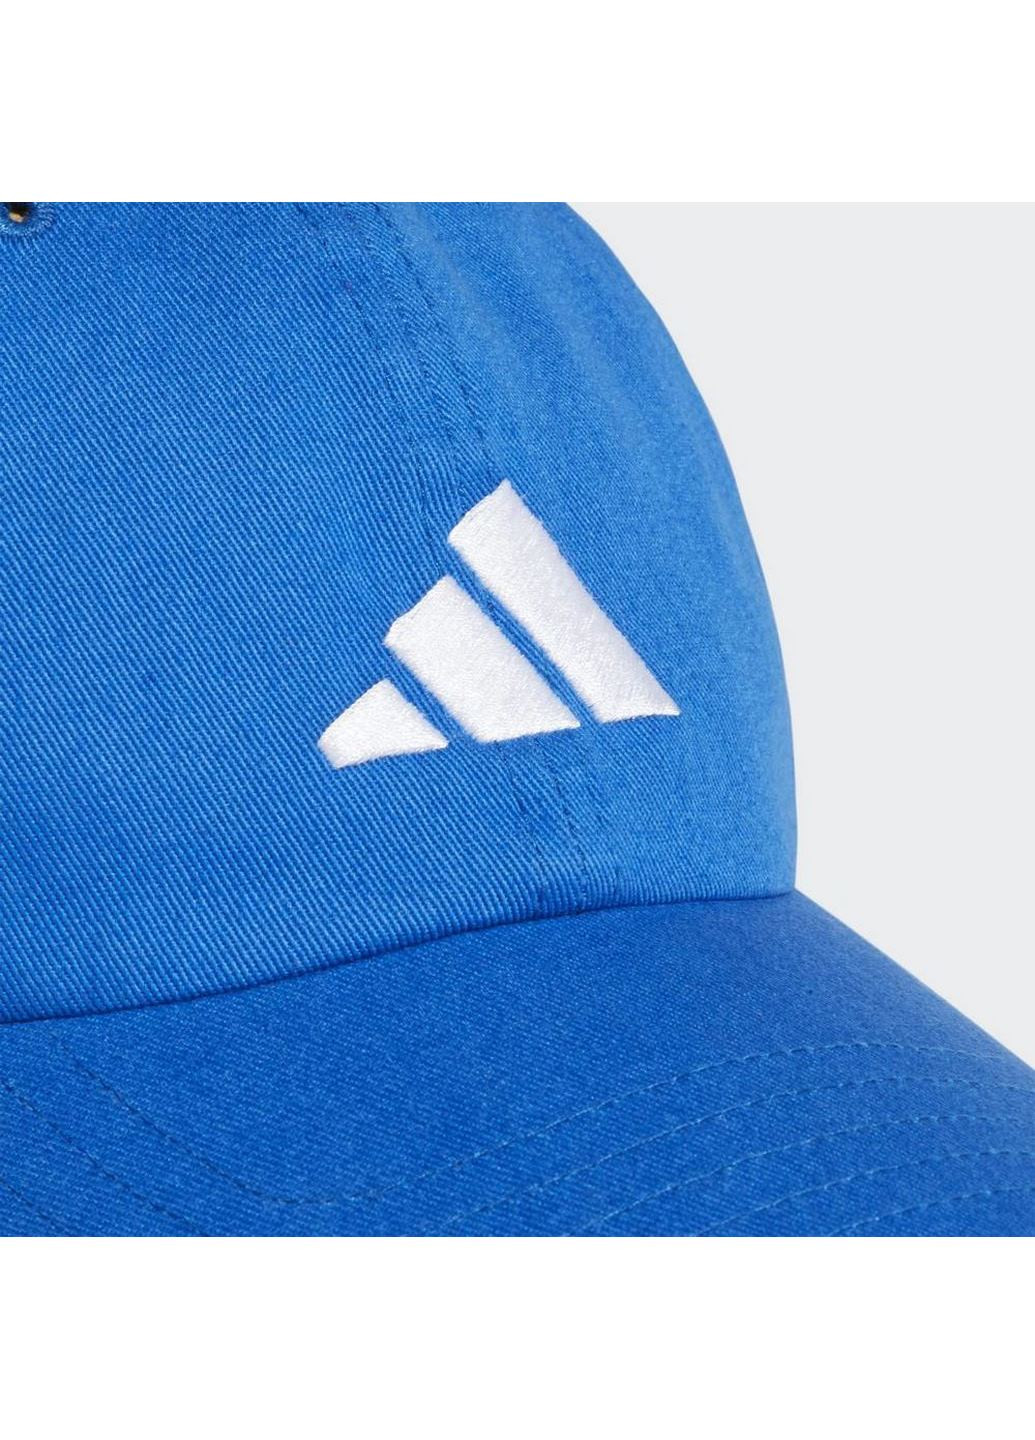 Кепка DAD CAP THE PAC FK4420 adidas (267407527)